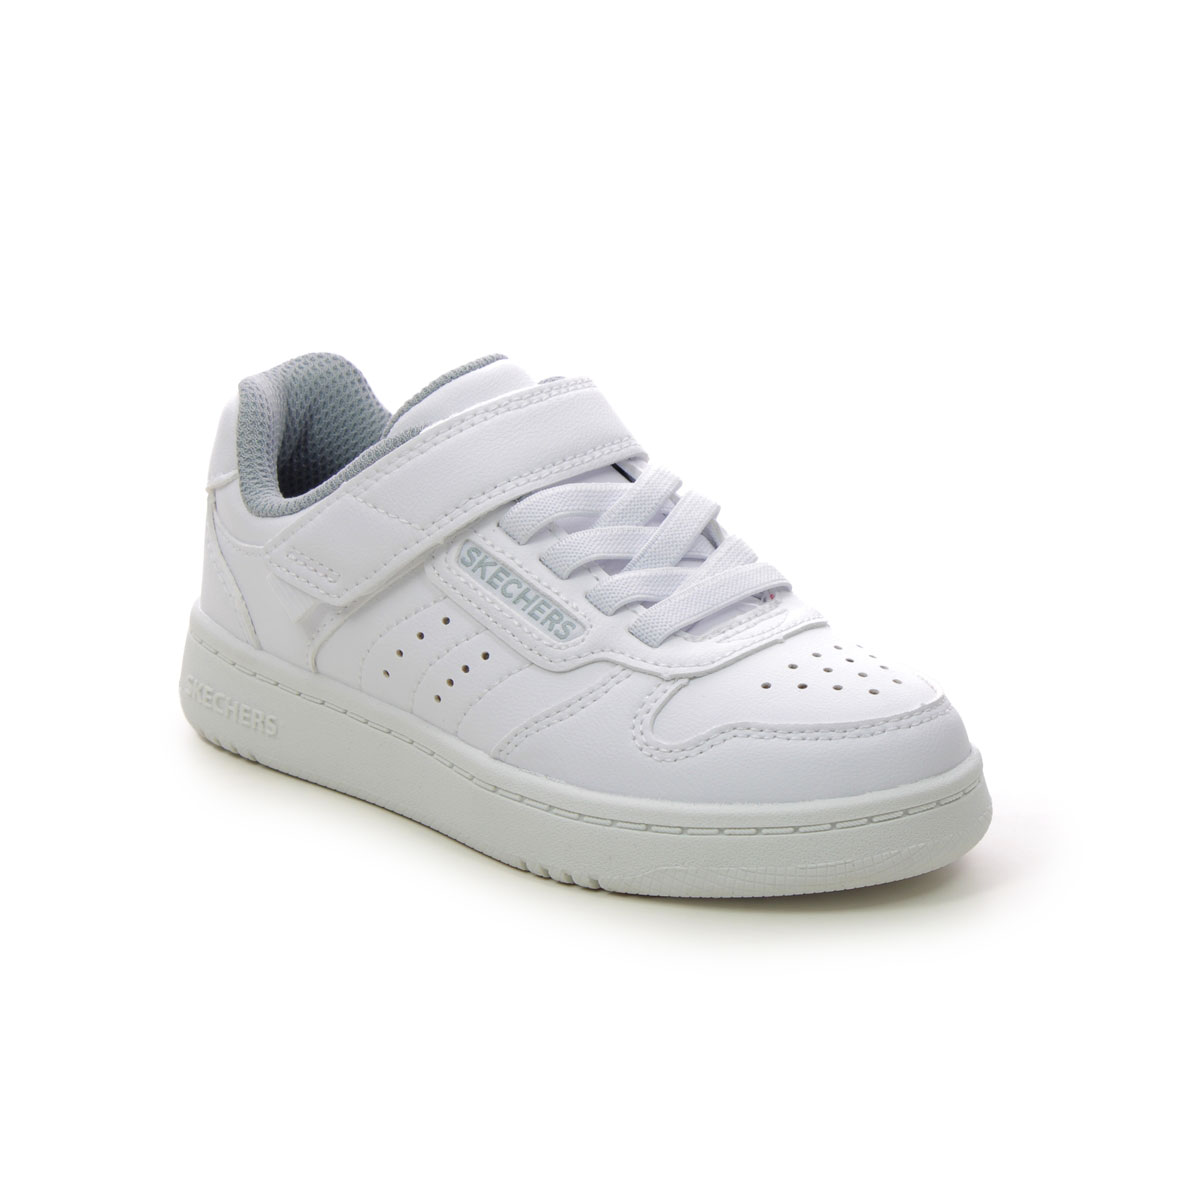 Skechers Quick Street Bungee WHT White Kids trainers 405638L in a Plain Man-made in Size 30